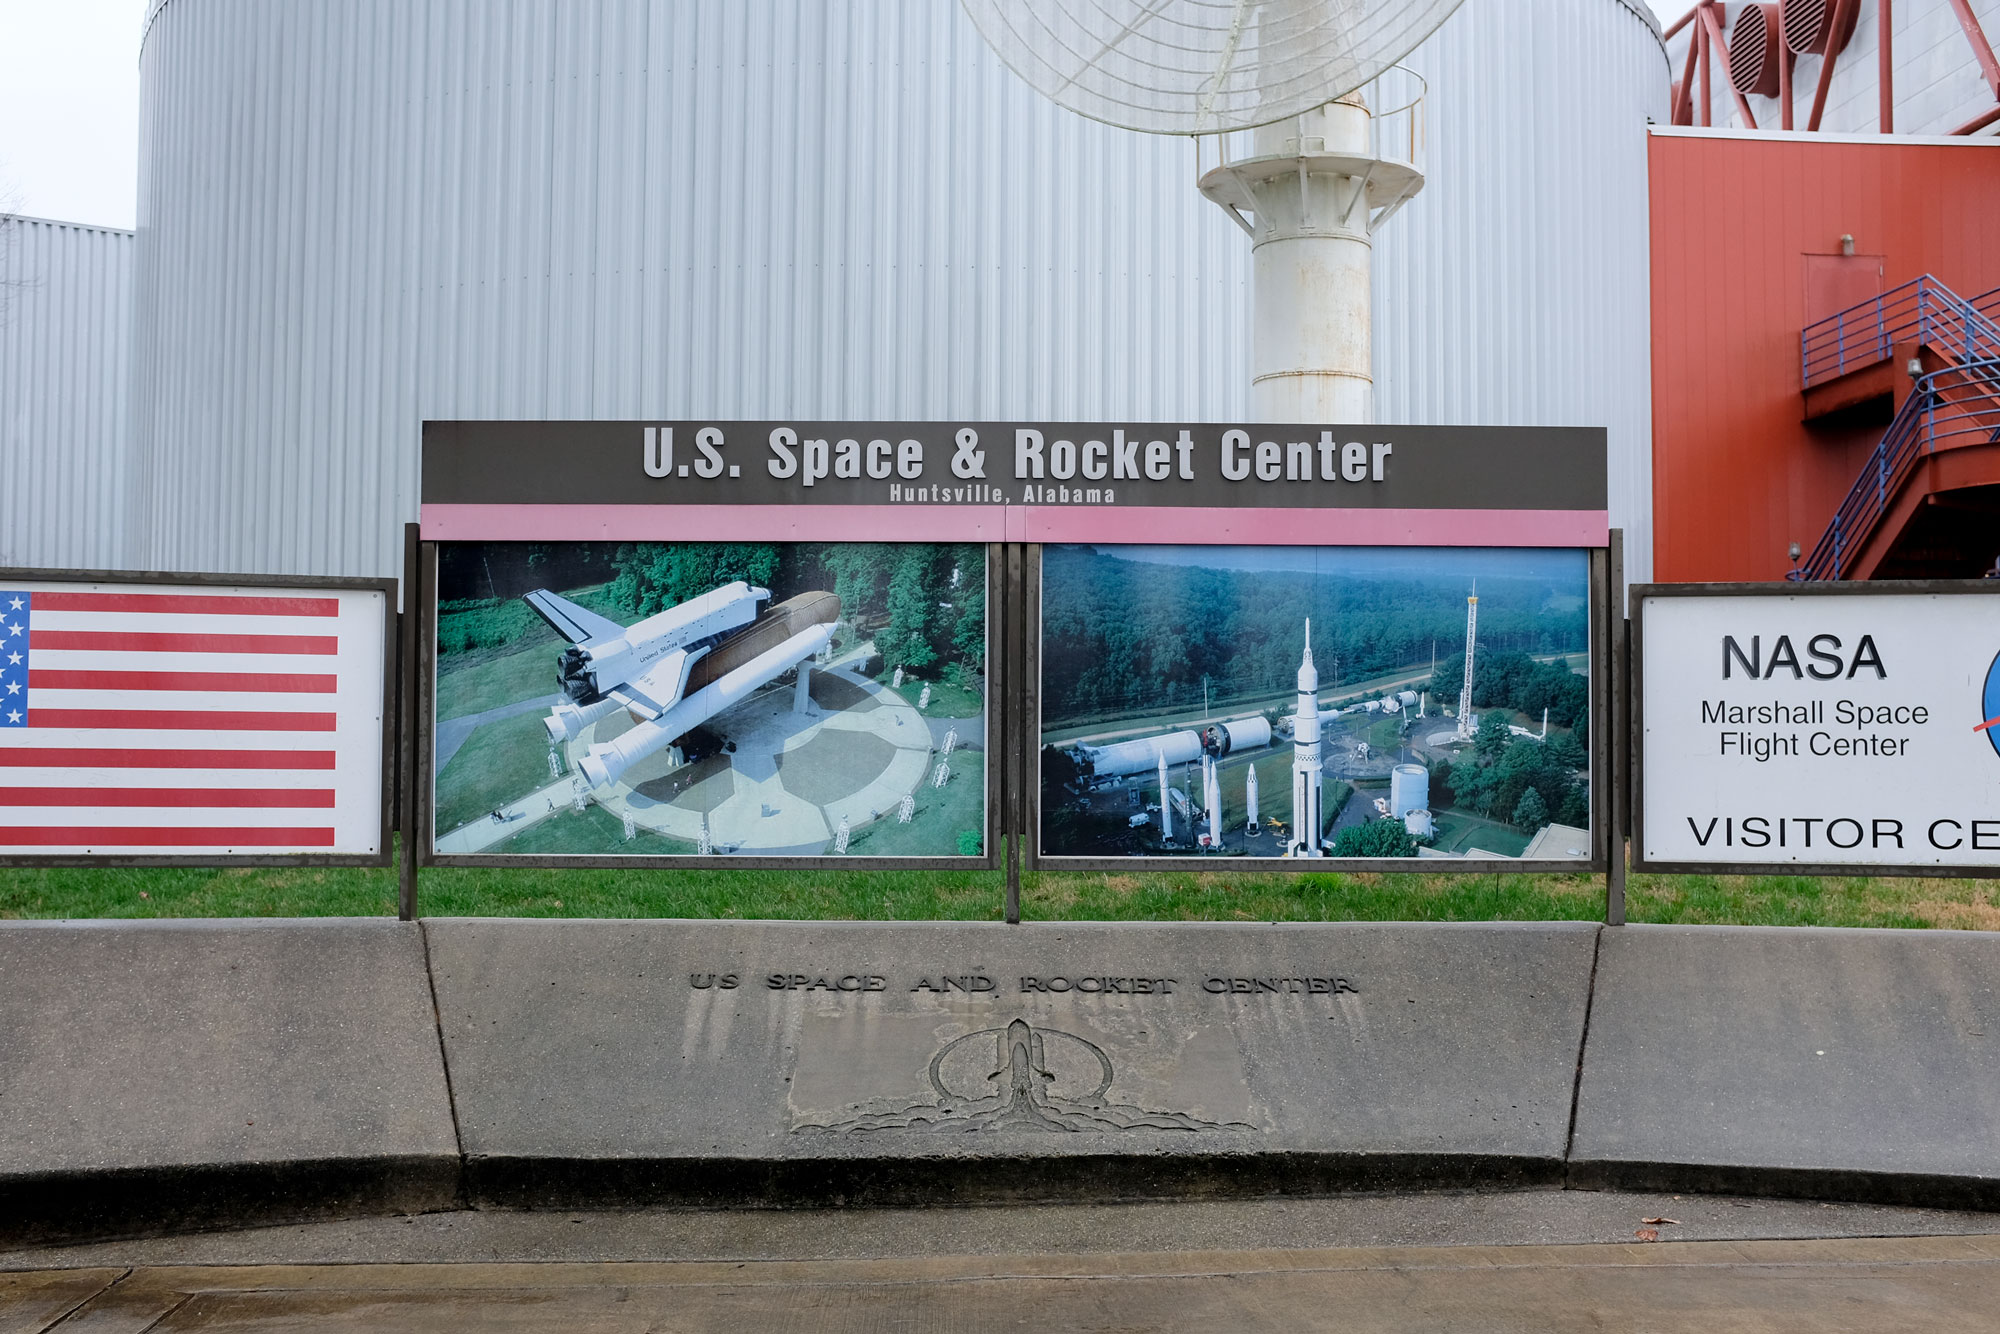 A photo outside of the U.S. Space & Rocket Center